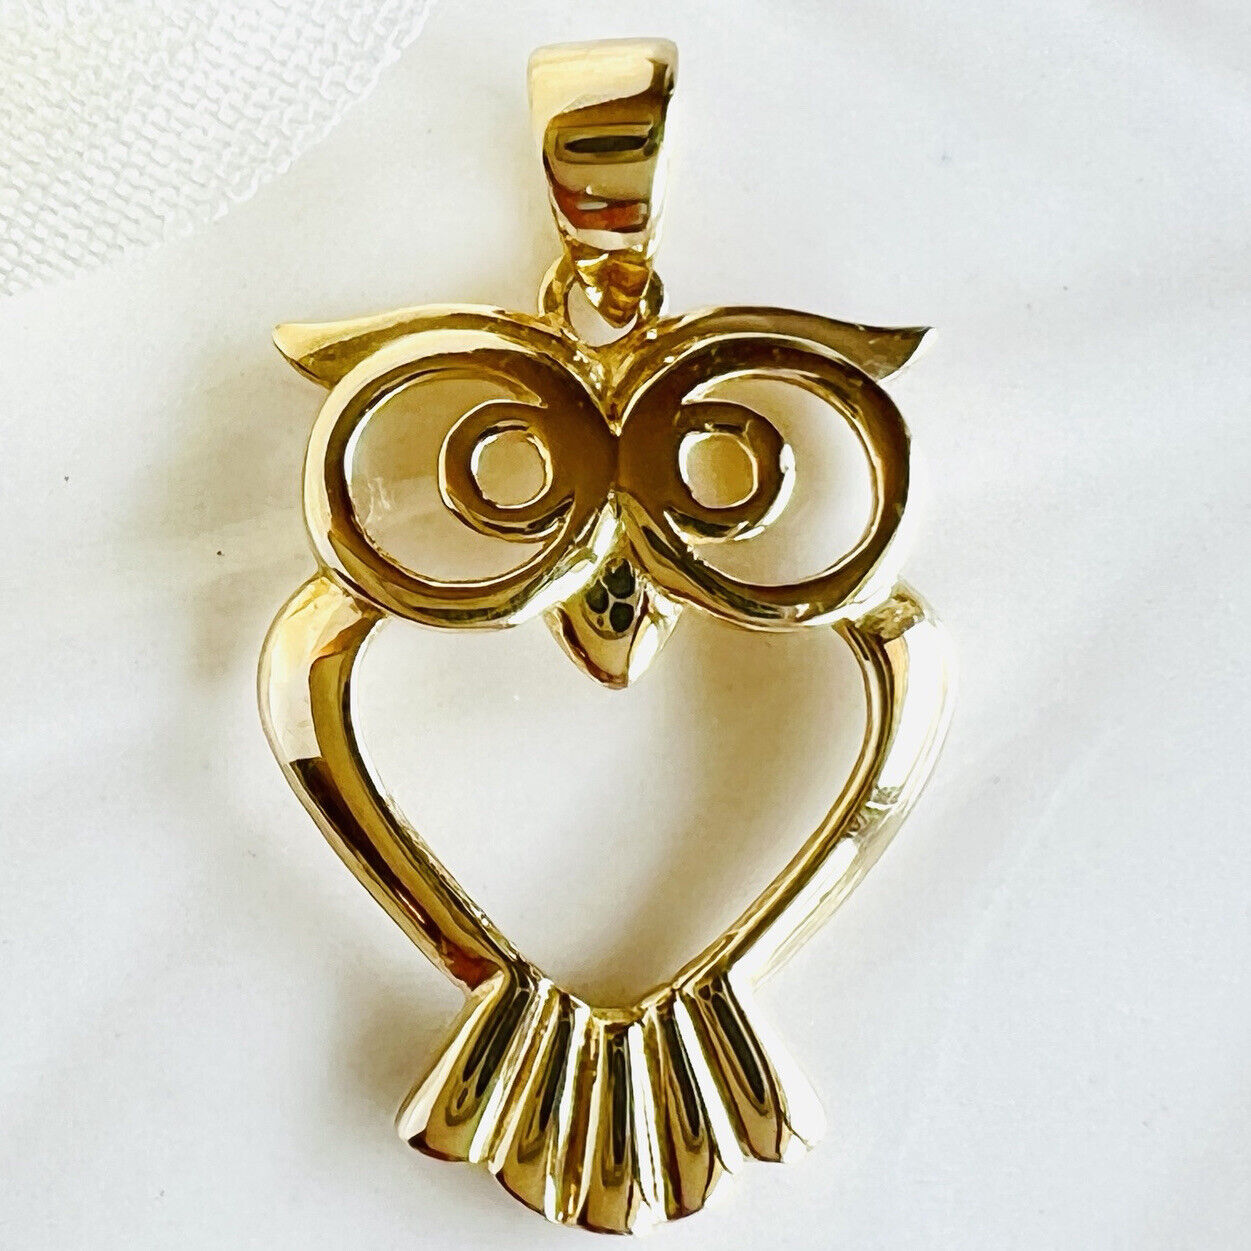 Adorable Solid 14k Yellow Gold Owl Pendant/Charm, New, 0.94"